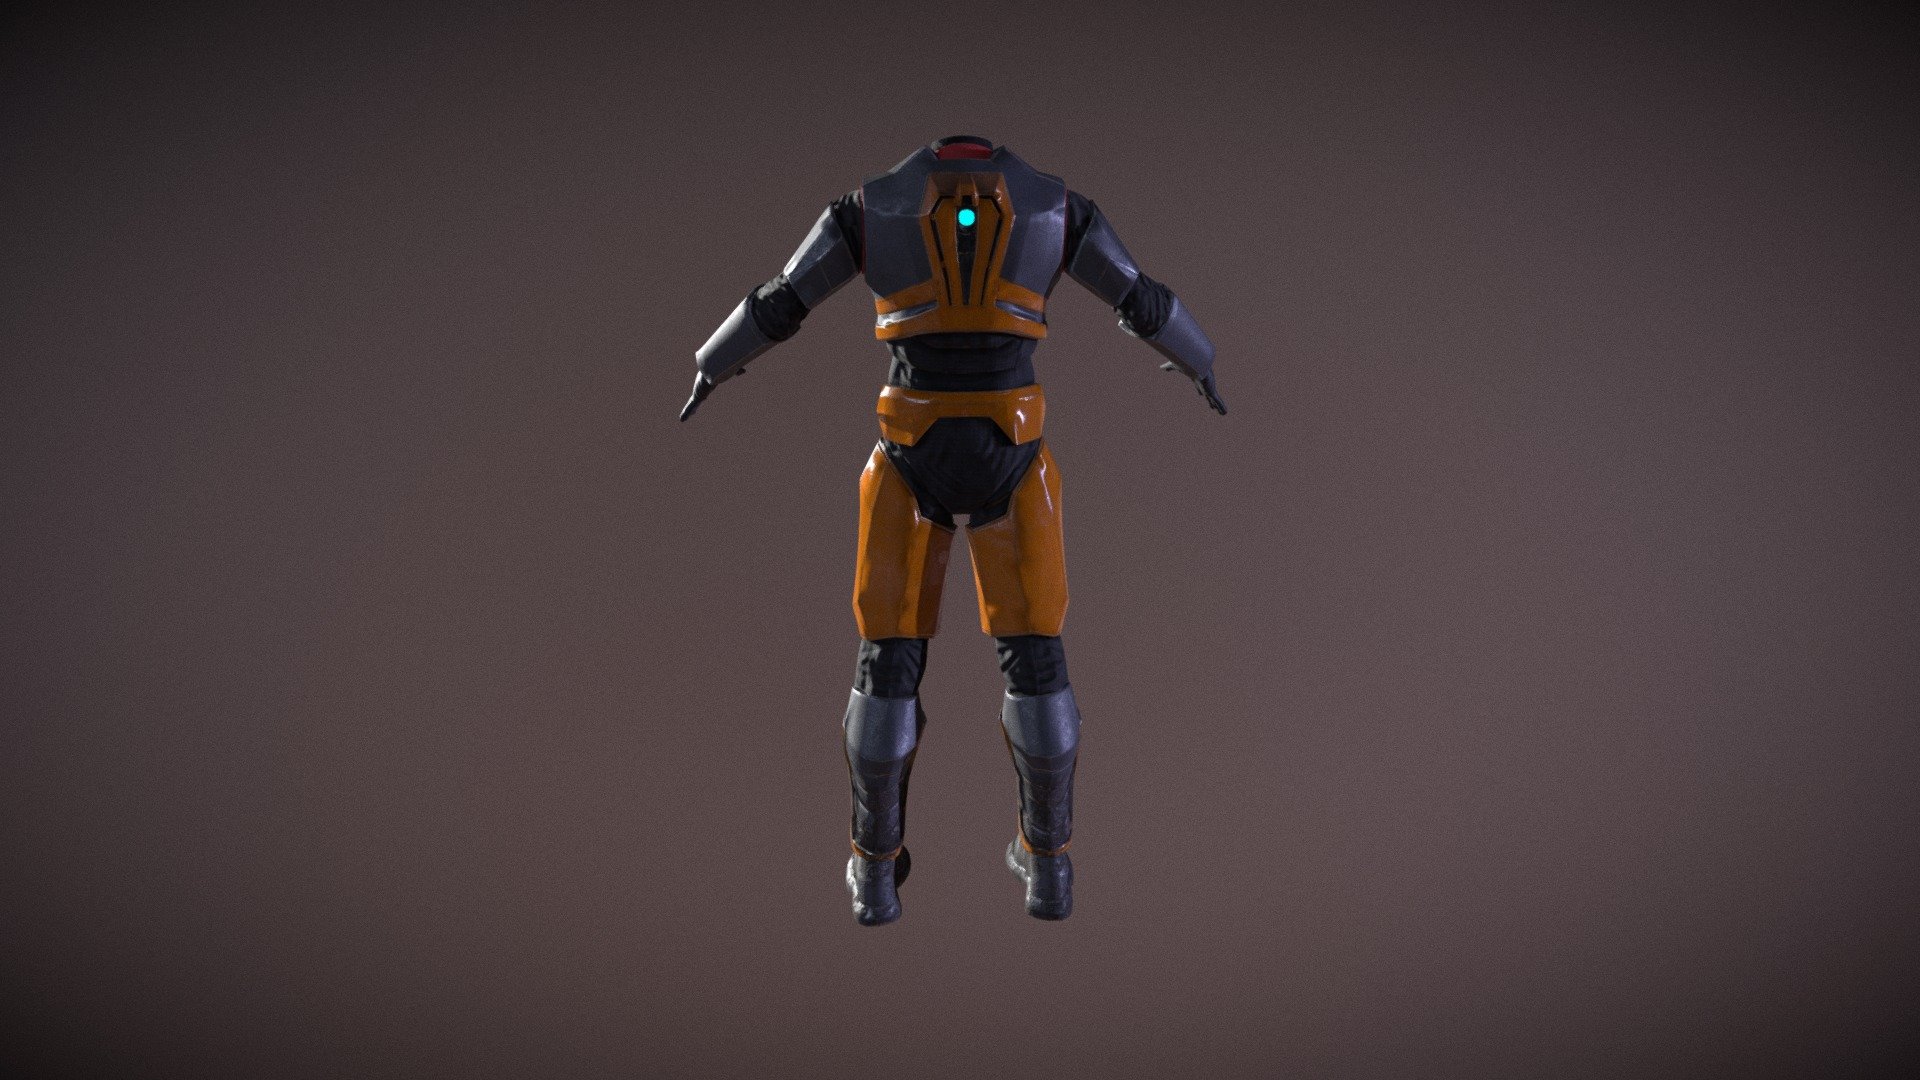 Was made for HDTF, but not used in the game :( If you wanna use this model for garrys mod, this Link
For create this model I used ZBrush, Substance painter, blender. I lost 2 days on create this model, that was good experiance in hard surface modeling 3d model